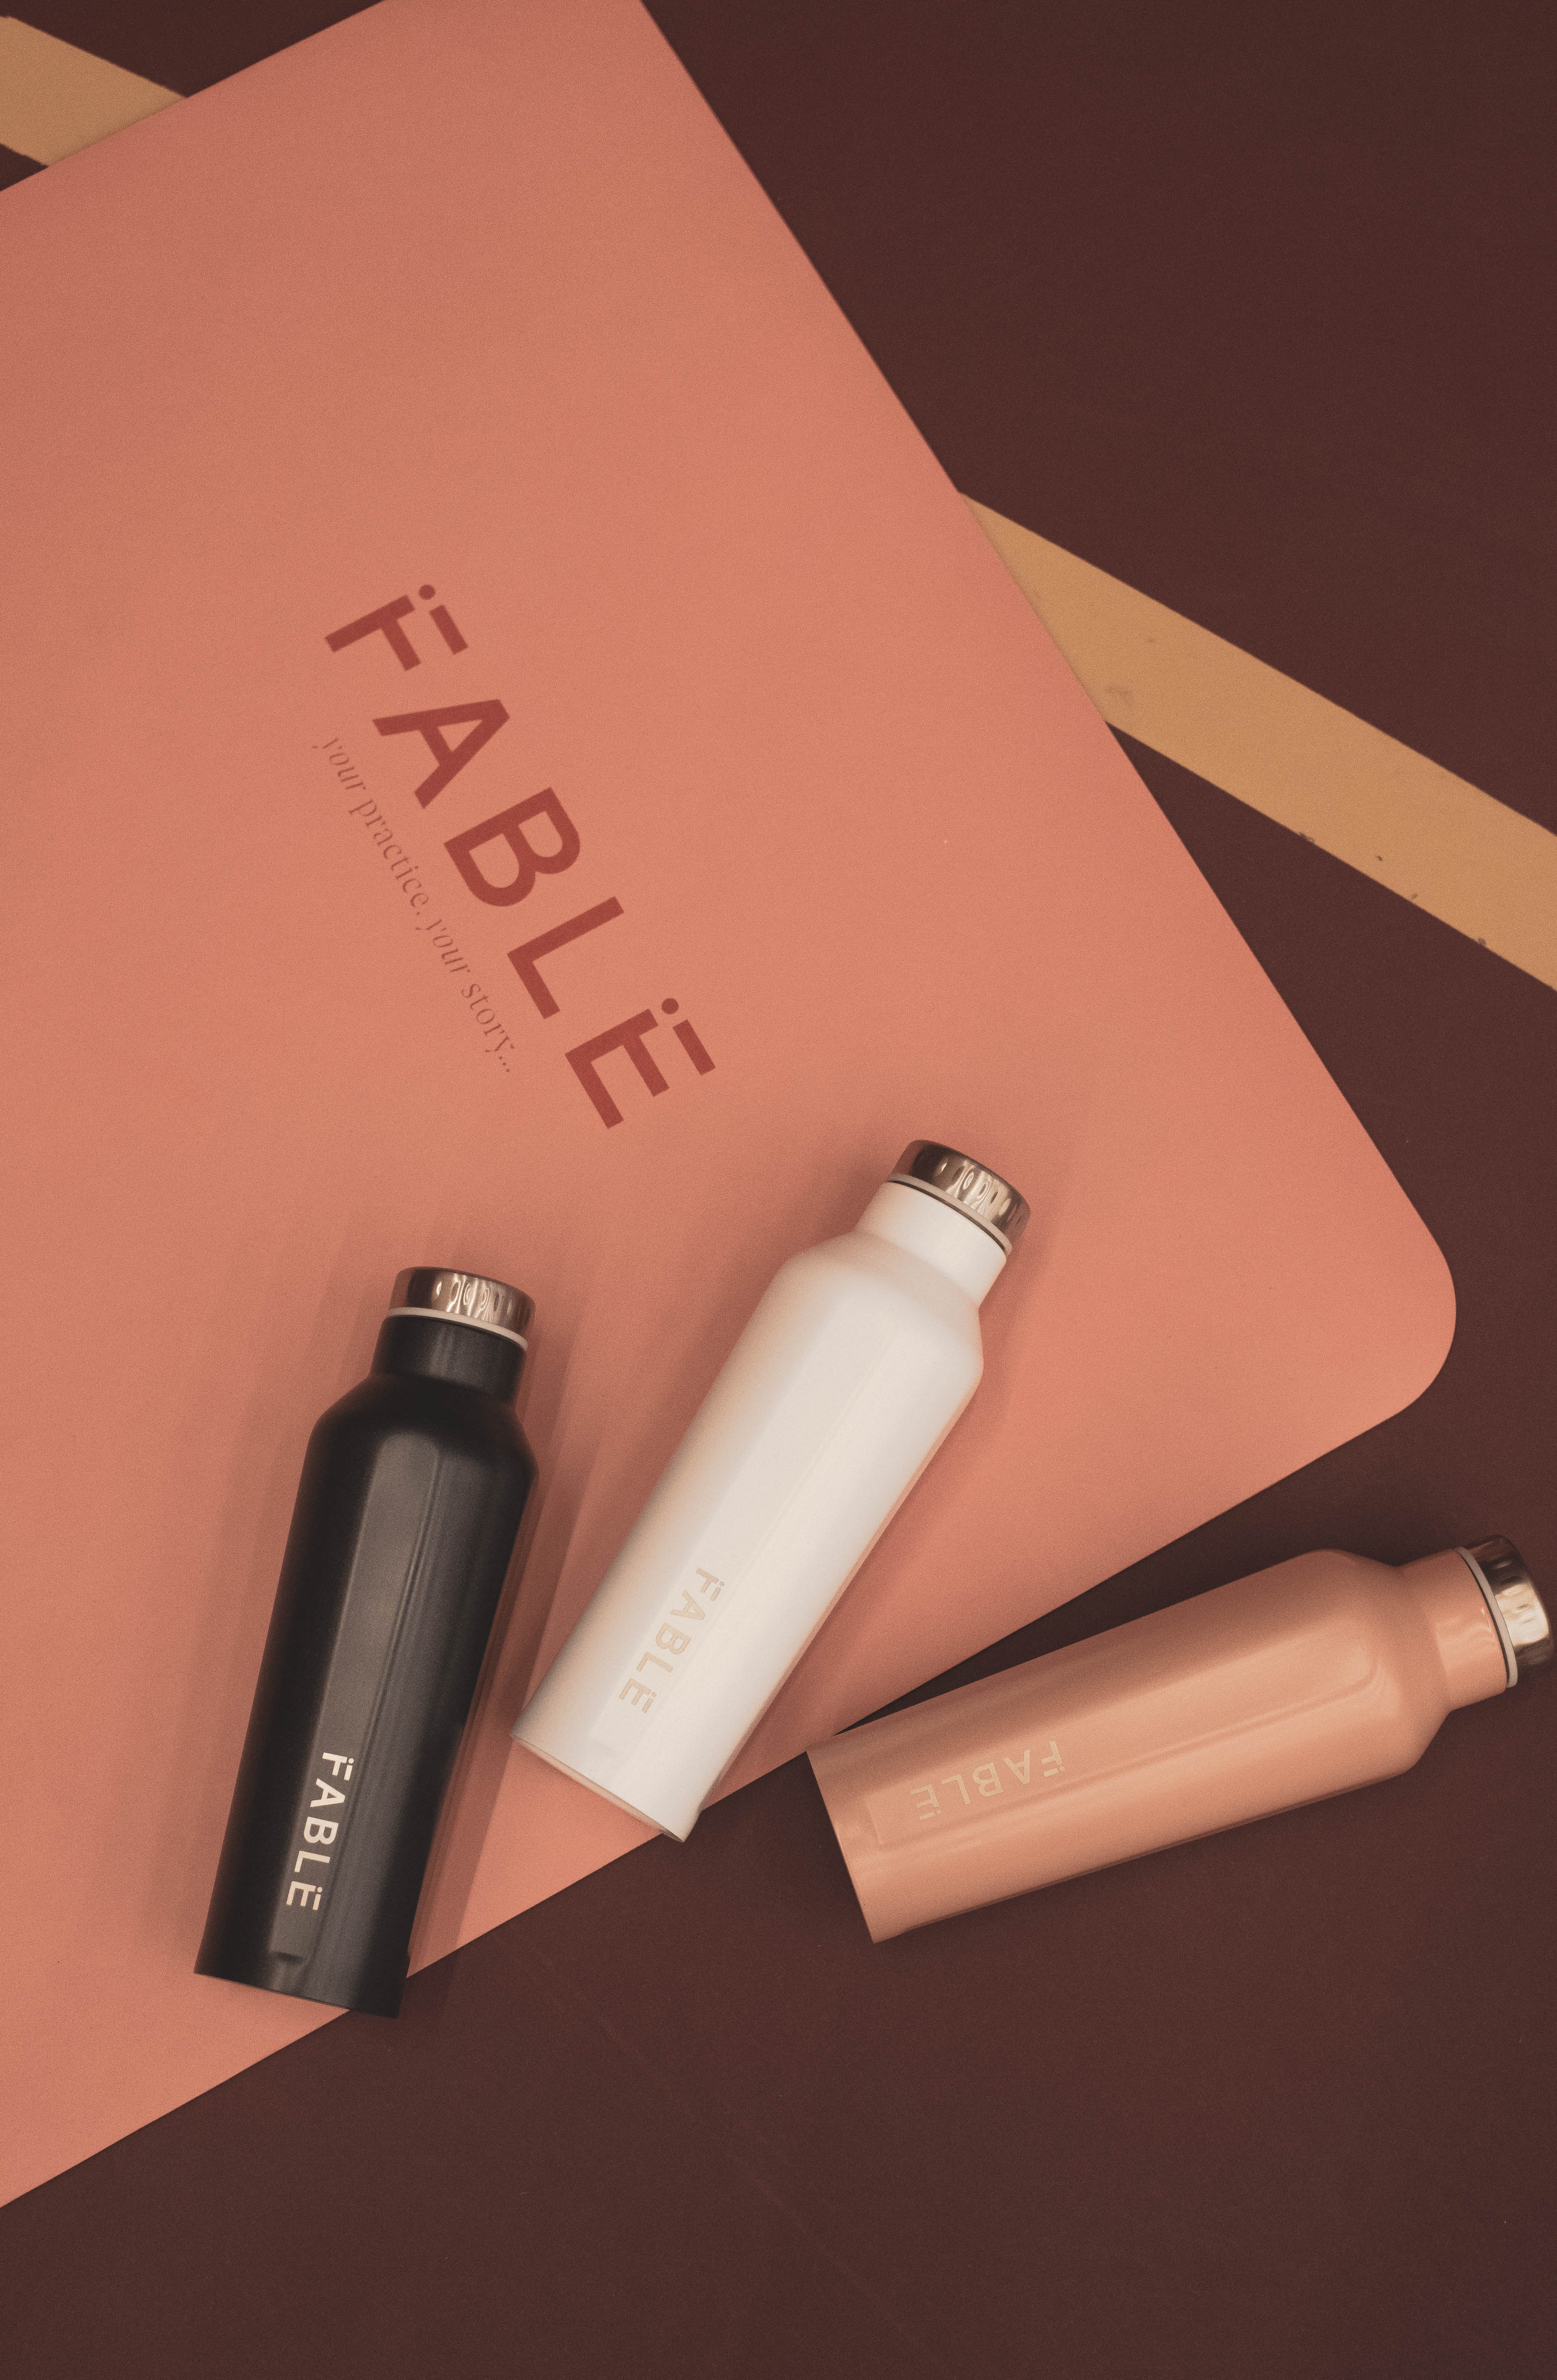 White Stainless Steel Drinks Bottle From Fable Yoga